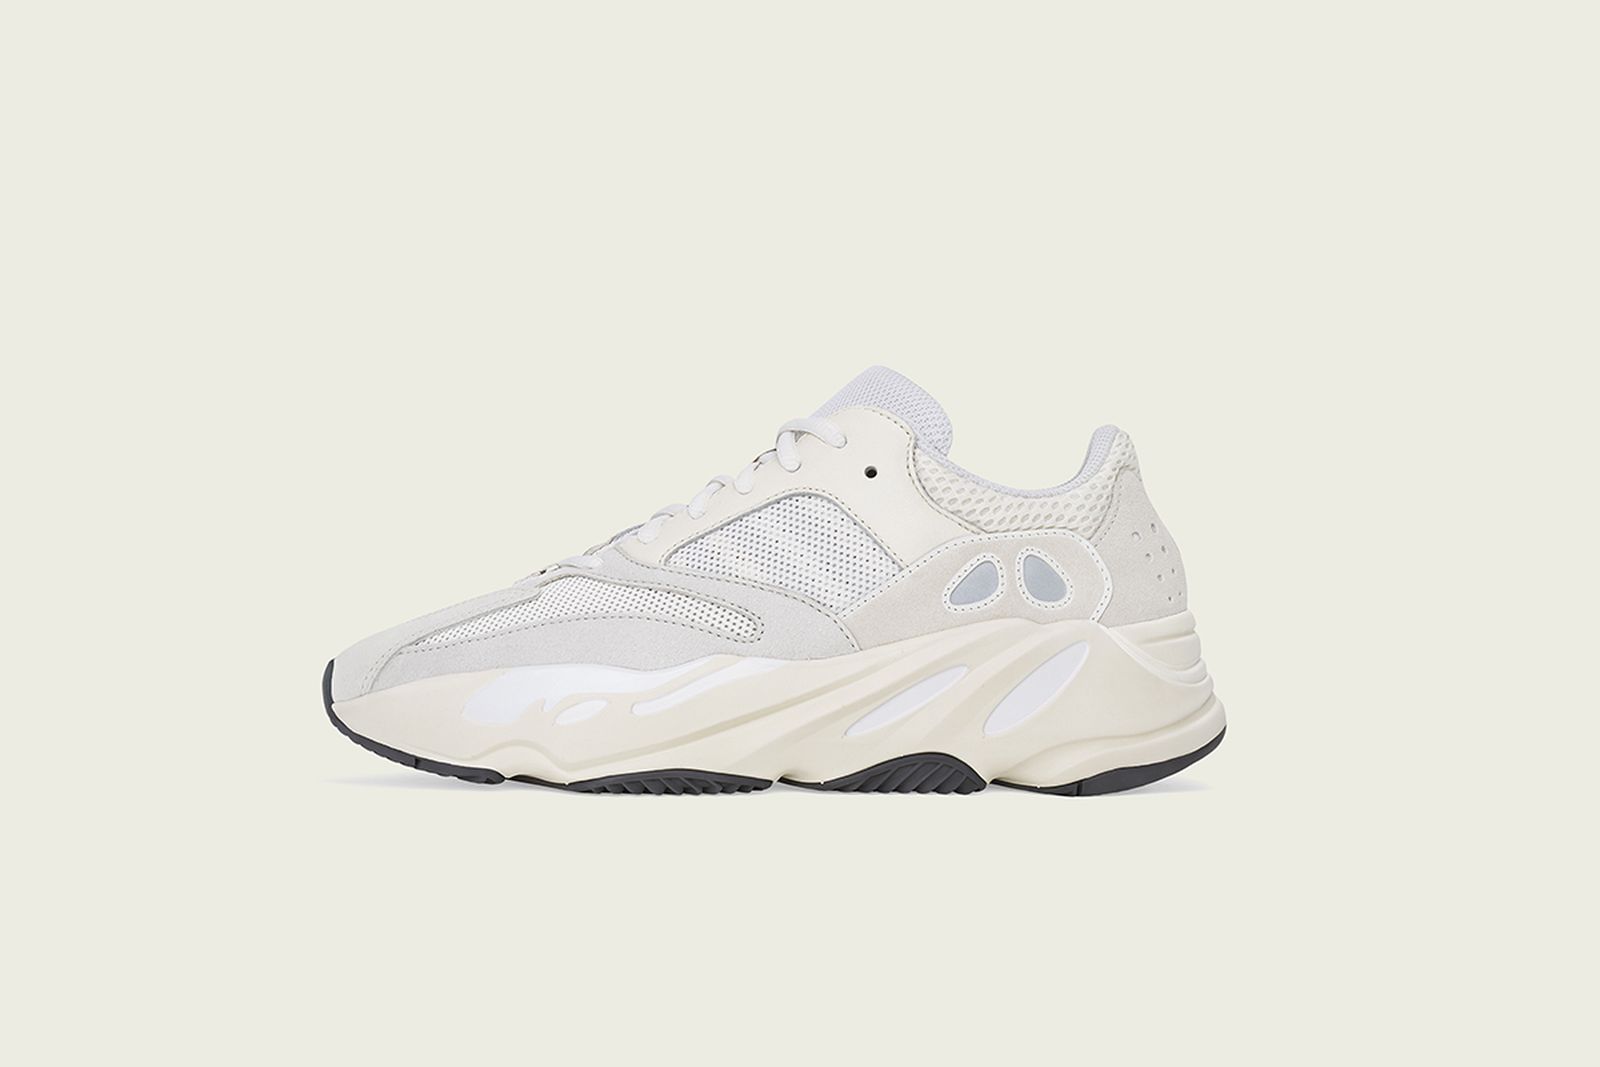 operation Watchful suspicious adidas YEEZY Boost 700 V2 "Analog" | Shop Now at StockX